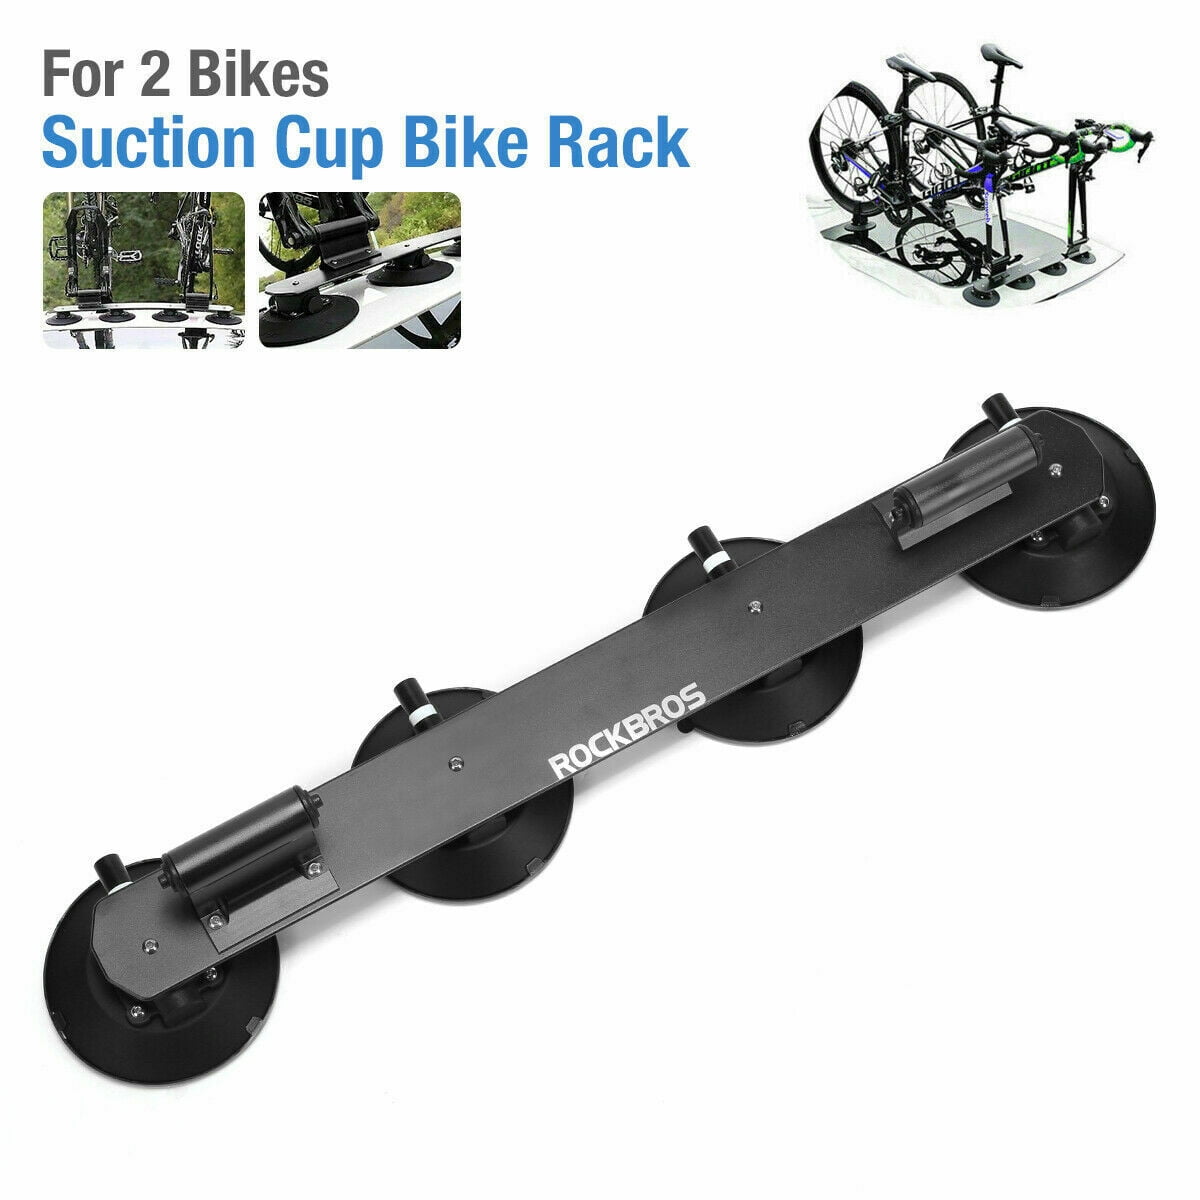 RockBros Bike Suction Rooftop Carrier Quick Installation Roof Rack Two-bikes 